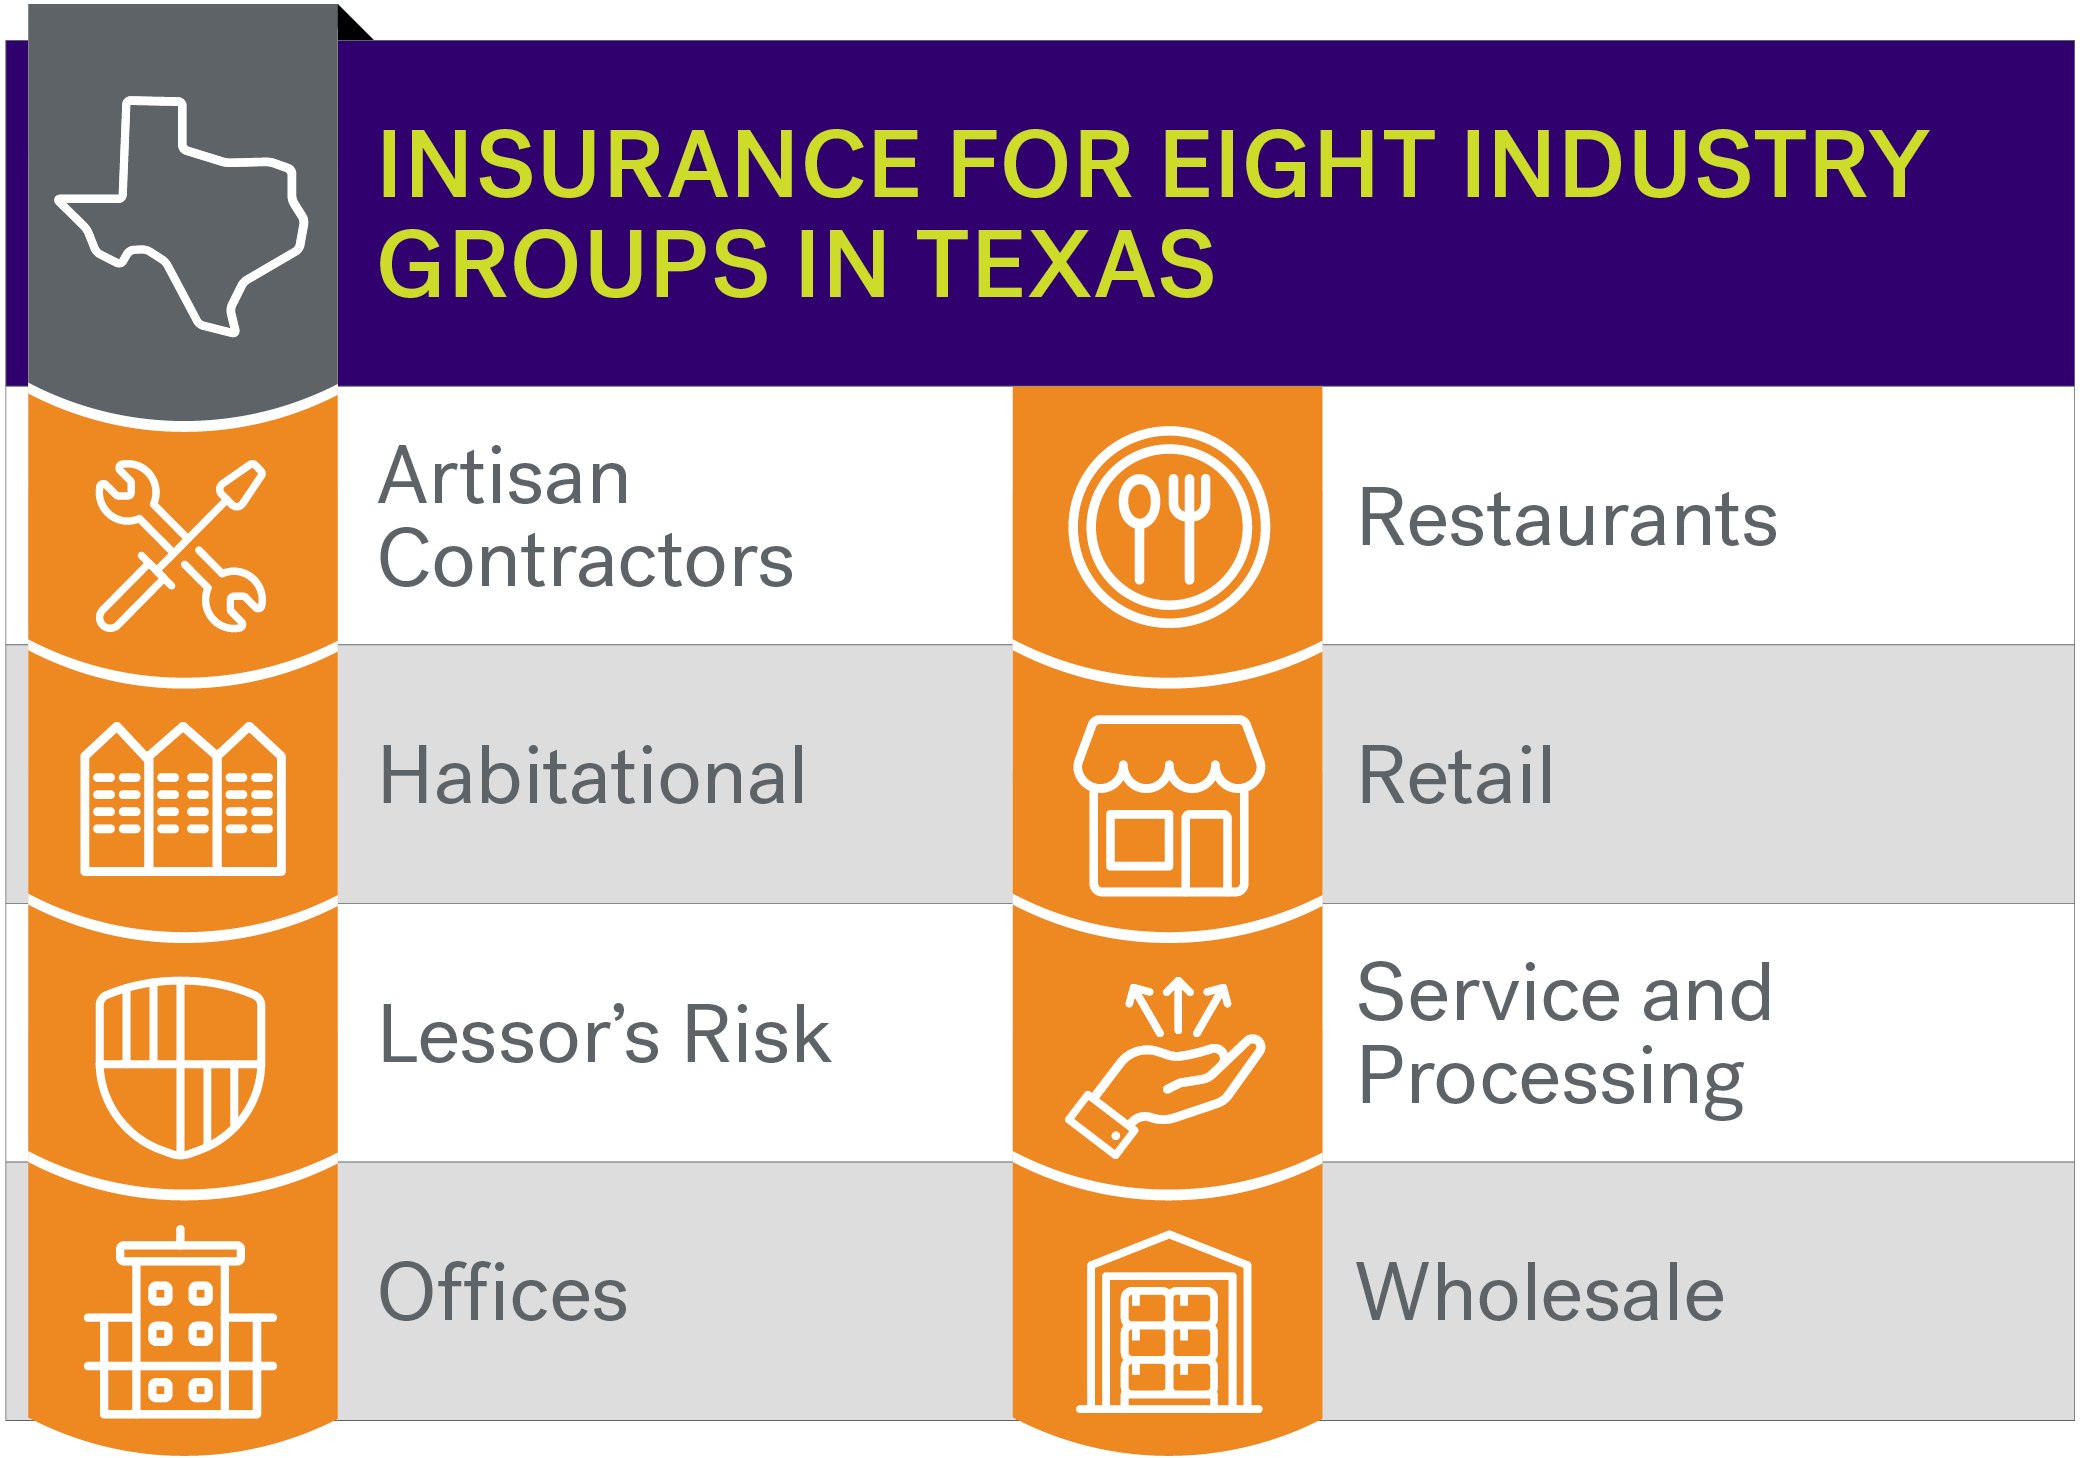 Texas business industry groups